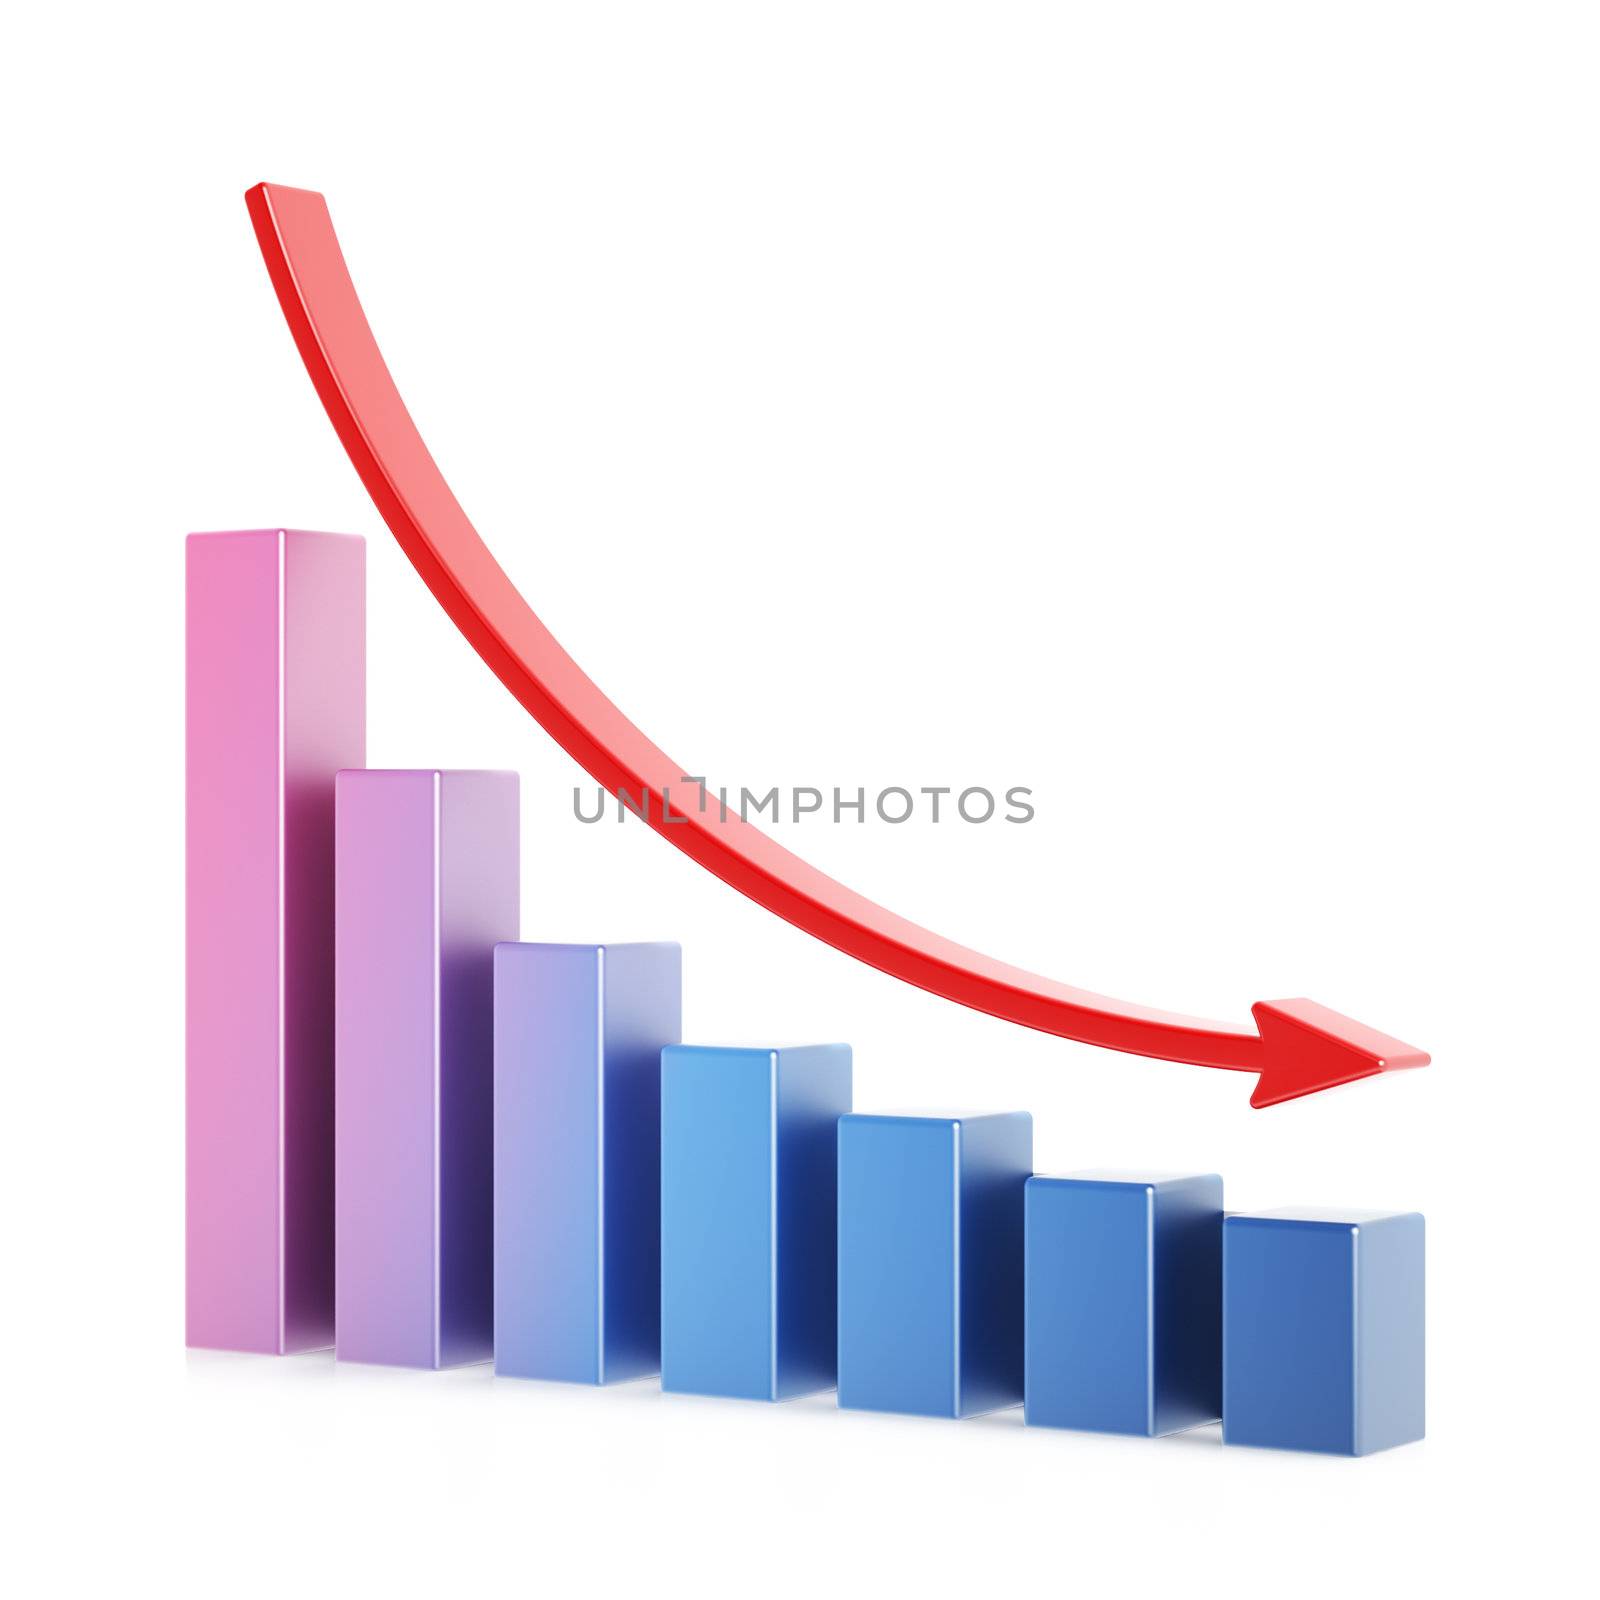 Business chart 3d over white background